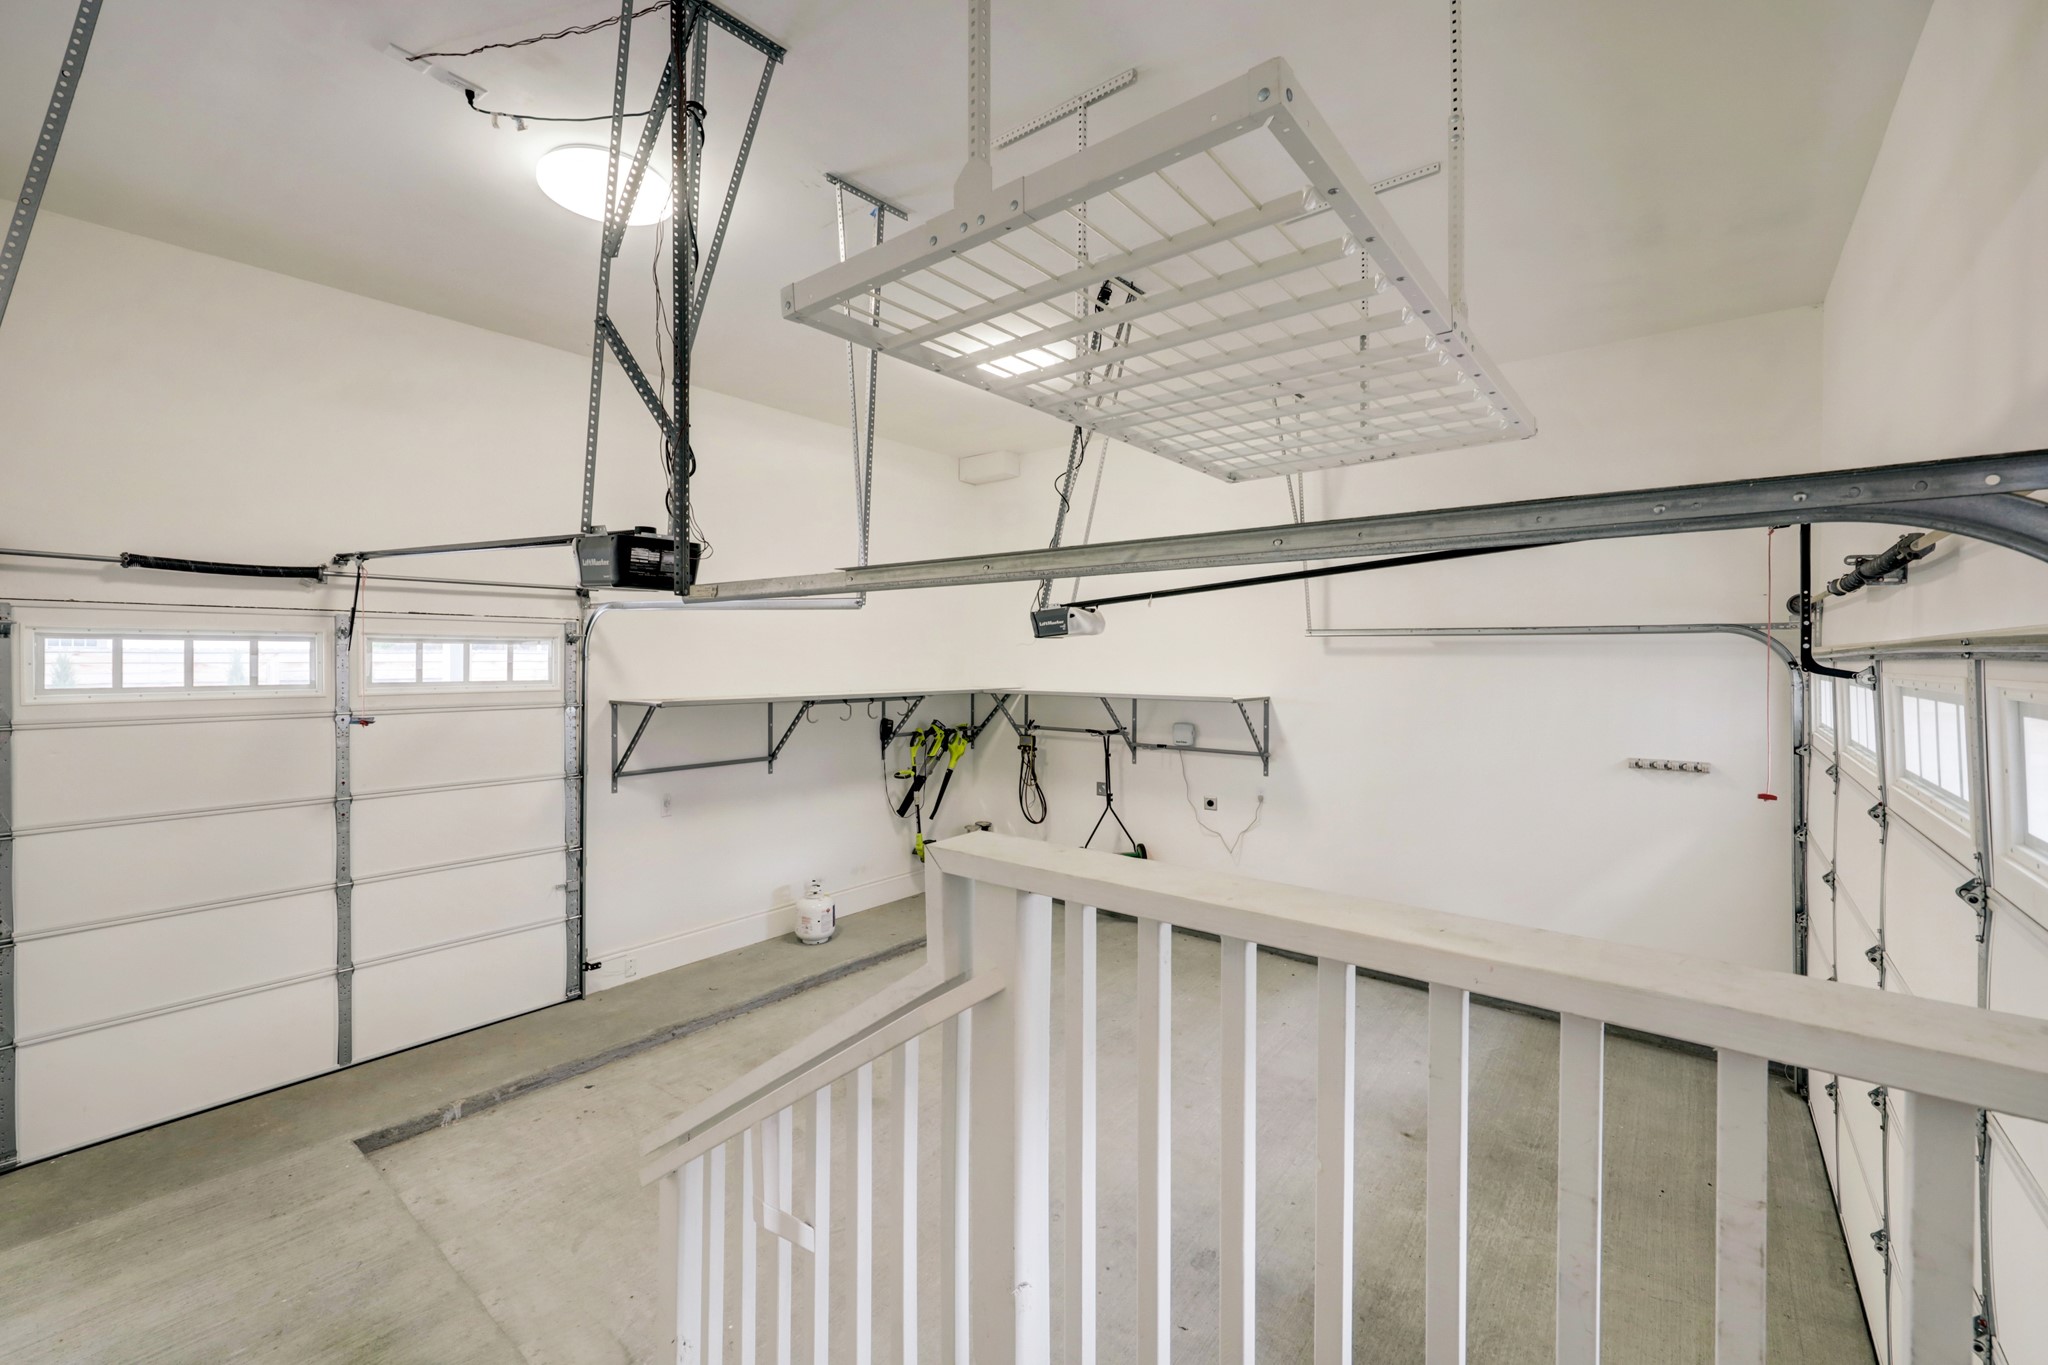 The extra-tall garage includes overhead storage and shelving, EV charging and a third door that opens to the rear yard for easy service access.